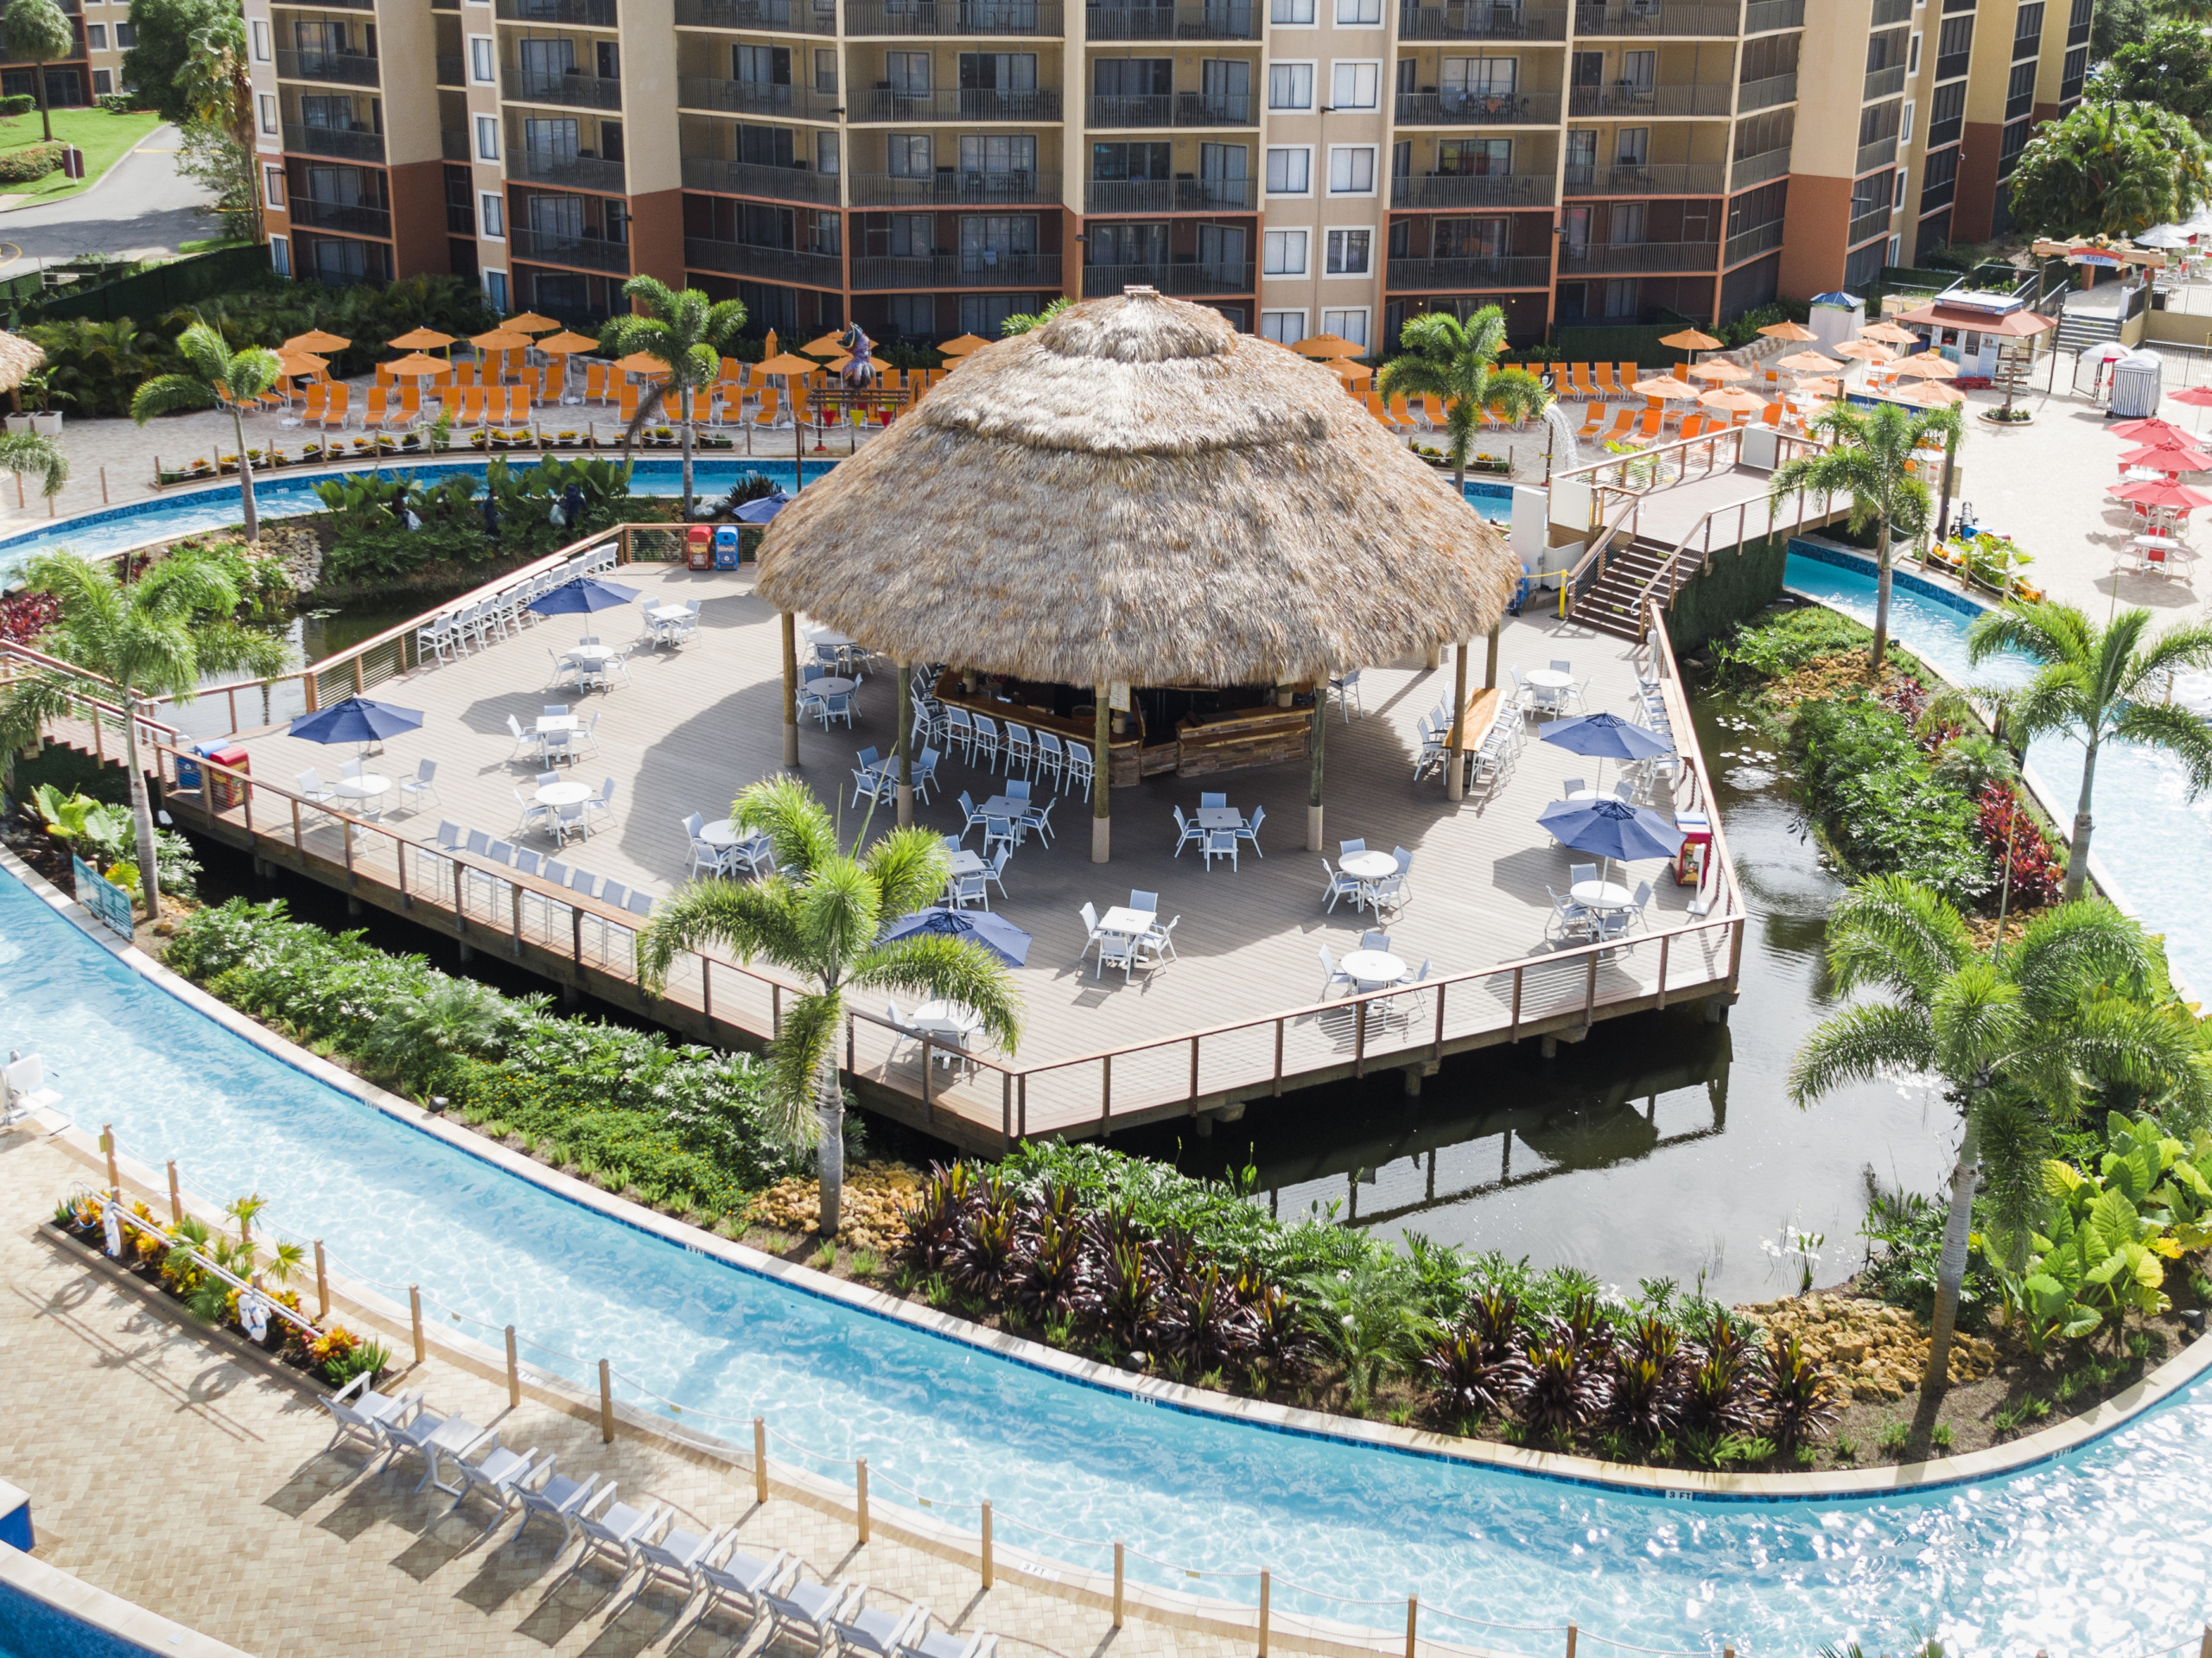 Westgate Lakes Resort & Spa - 3 Nights From $329 – Best Deal Orlando Universal